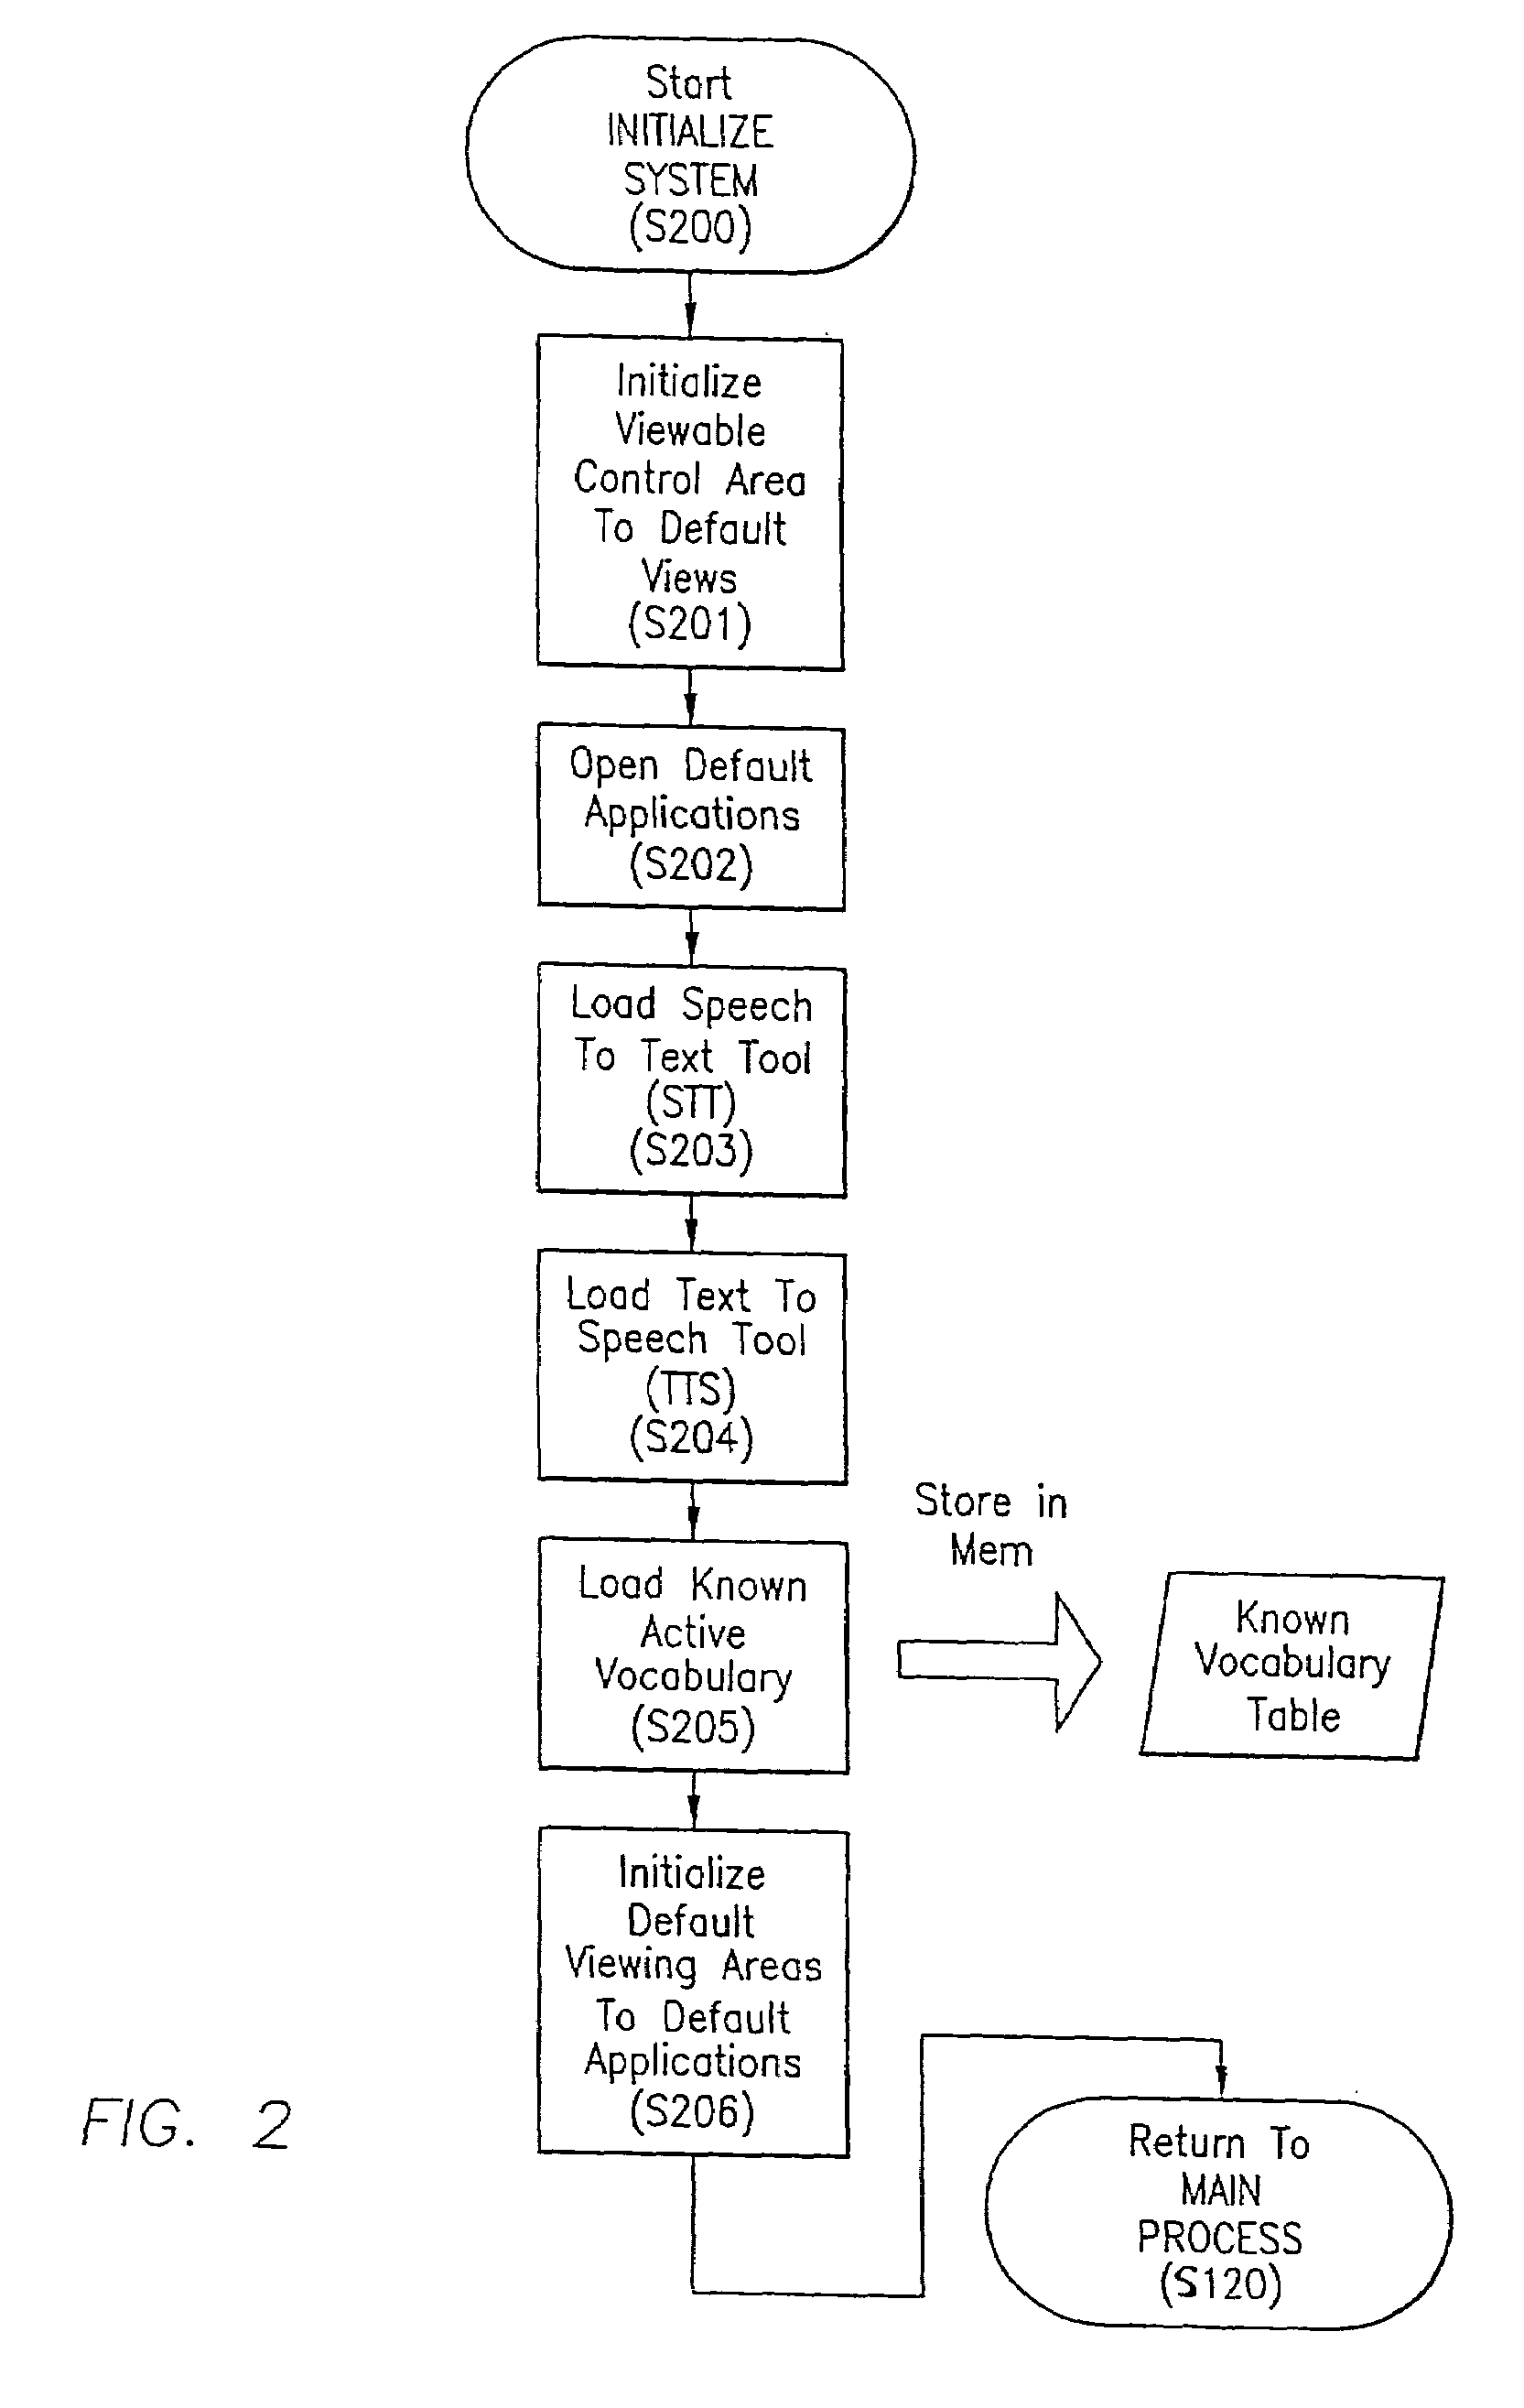 Method for integrating processes with a multi-faceted human centered interface